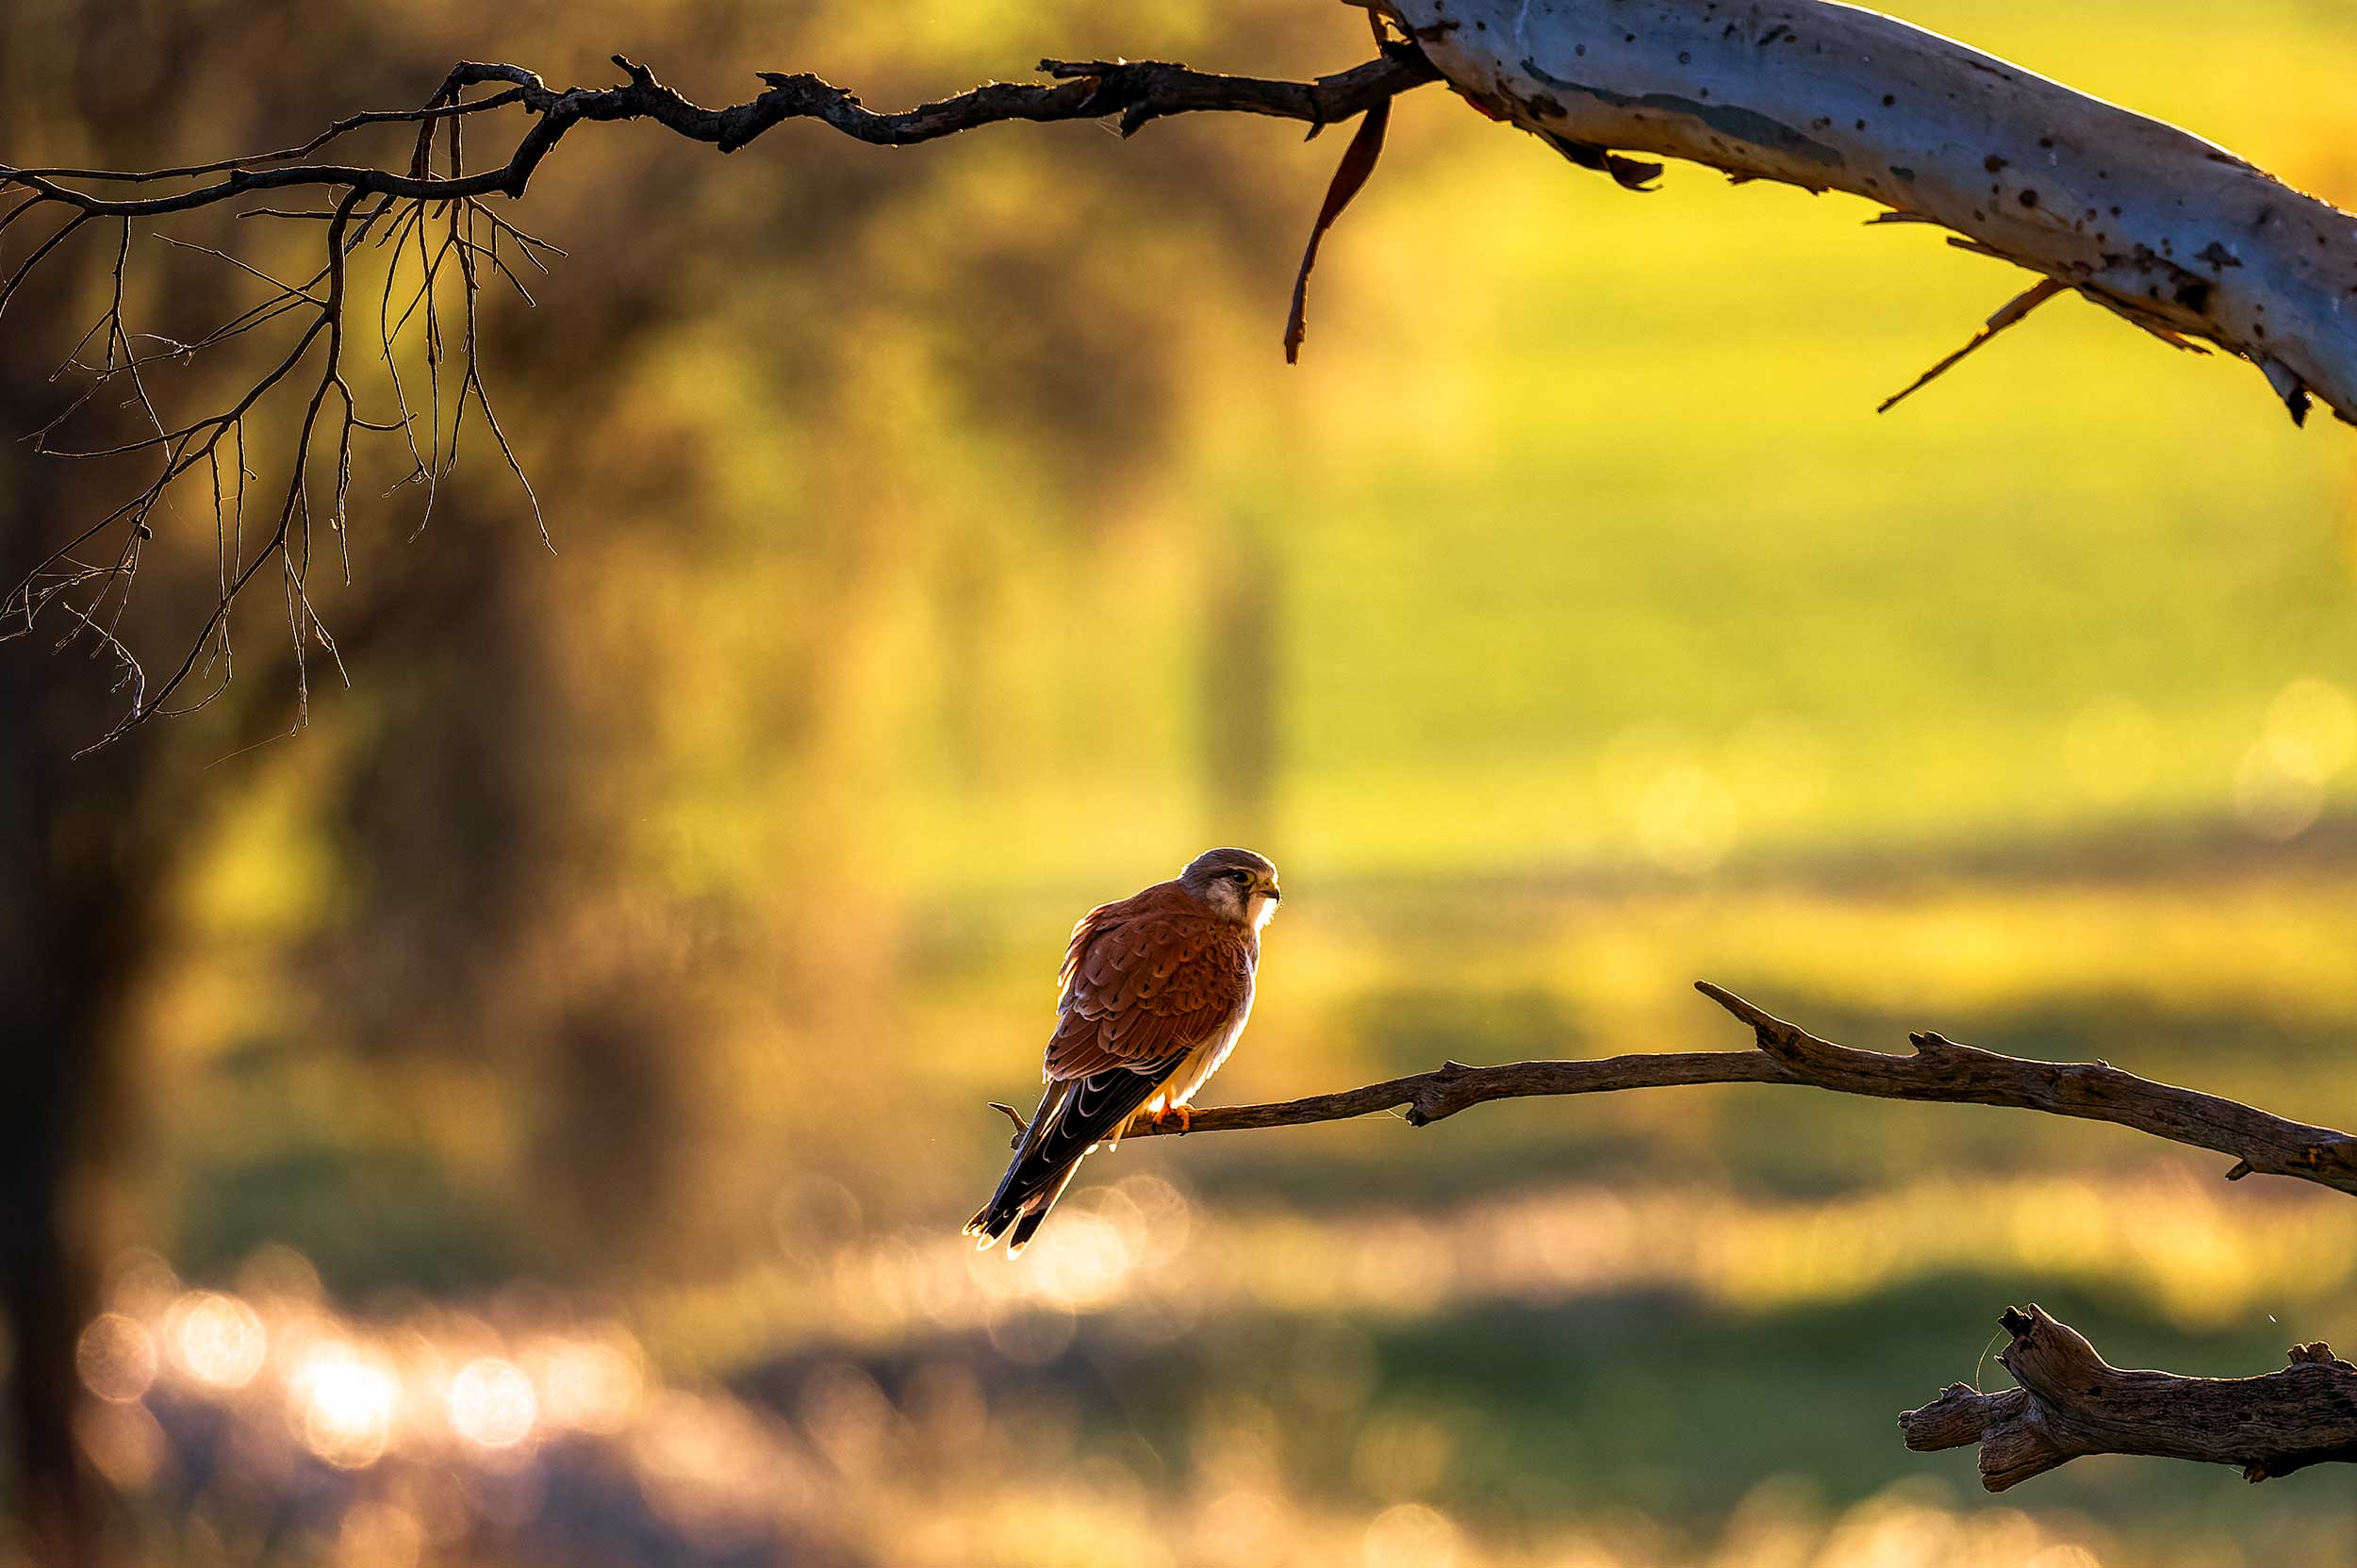 Nankeen Kestrel sitting in a gum tree at sunset. The light was beautiful